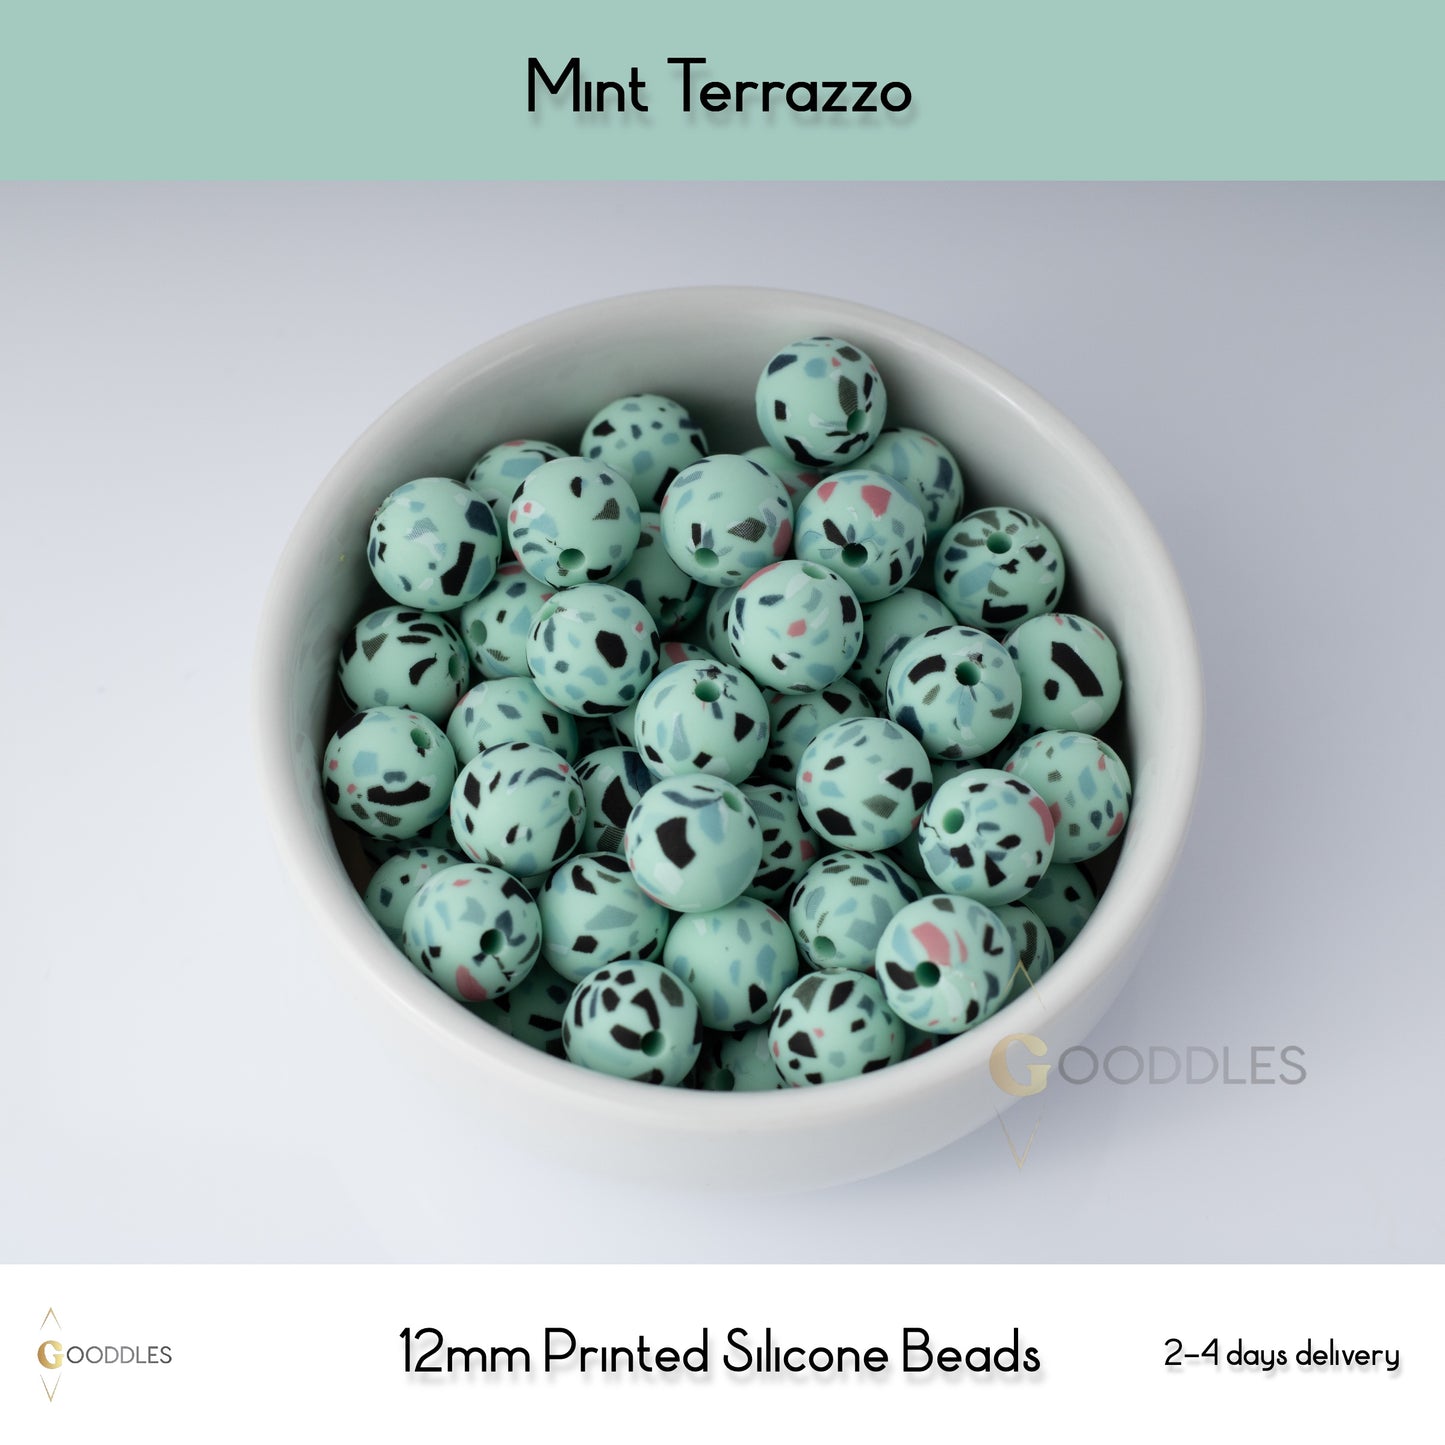 5pcs, Mint Terrazzo Silicone Beads Printed Round Silicone Beads